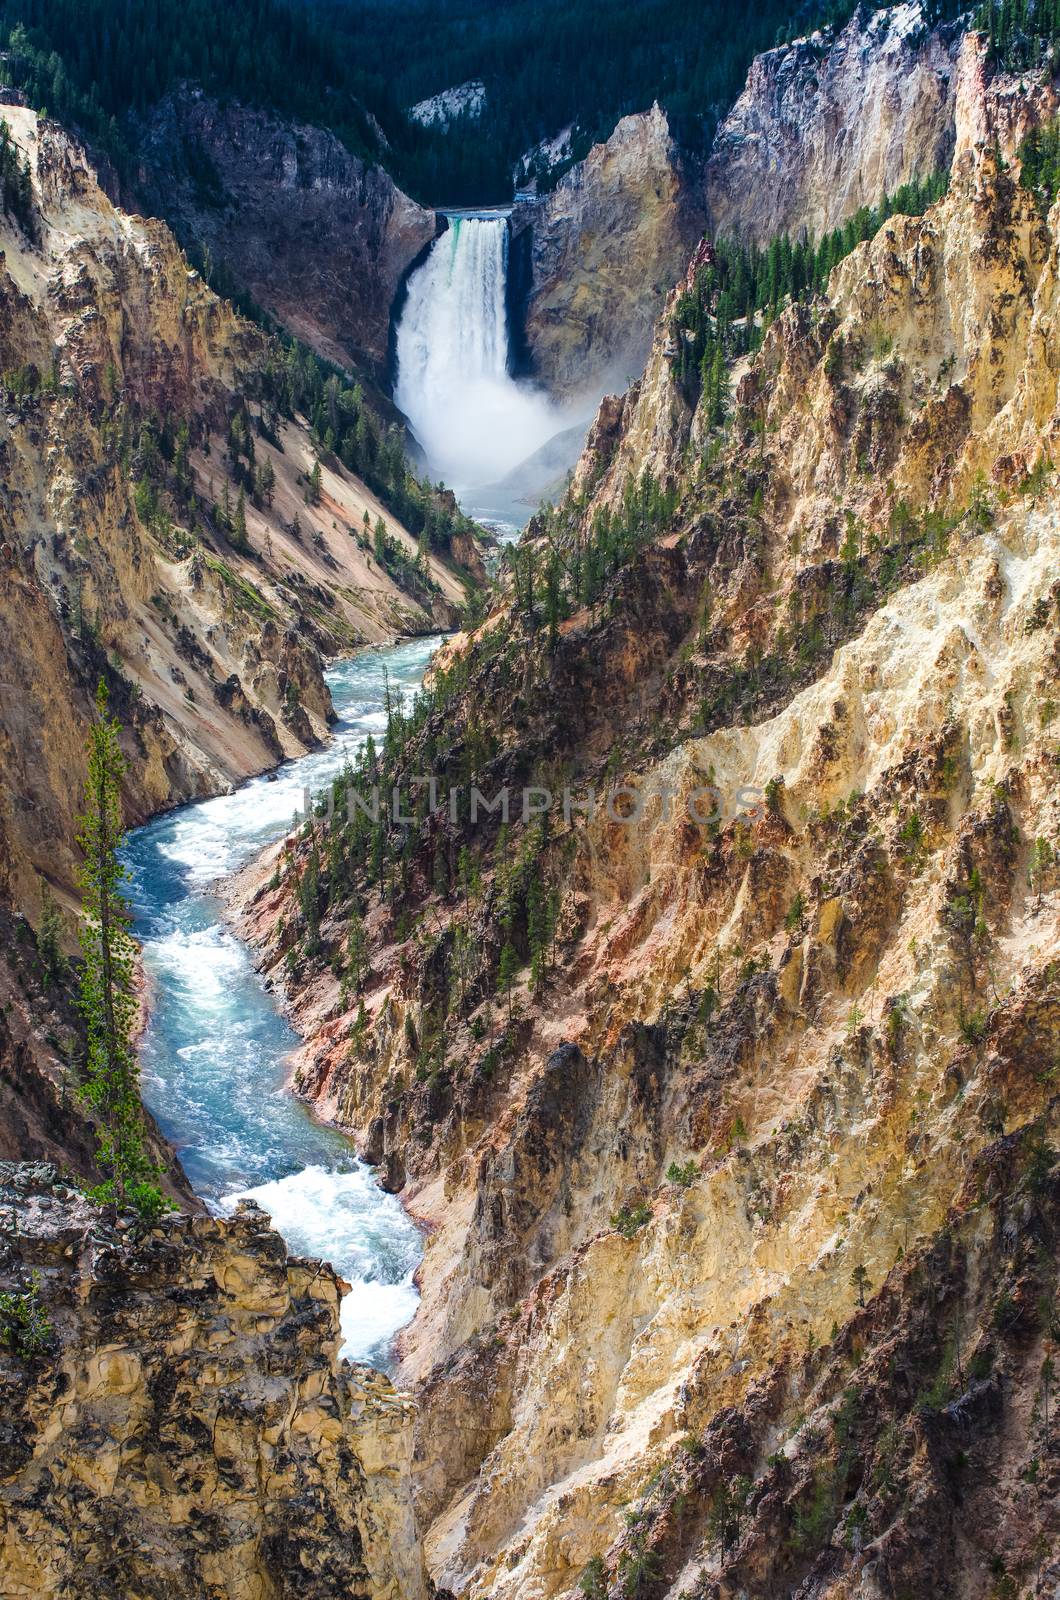 Landscape view at Grand canyon of Yellowstone, USA by martinm303